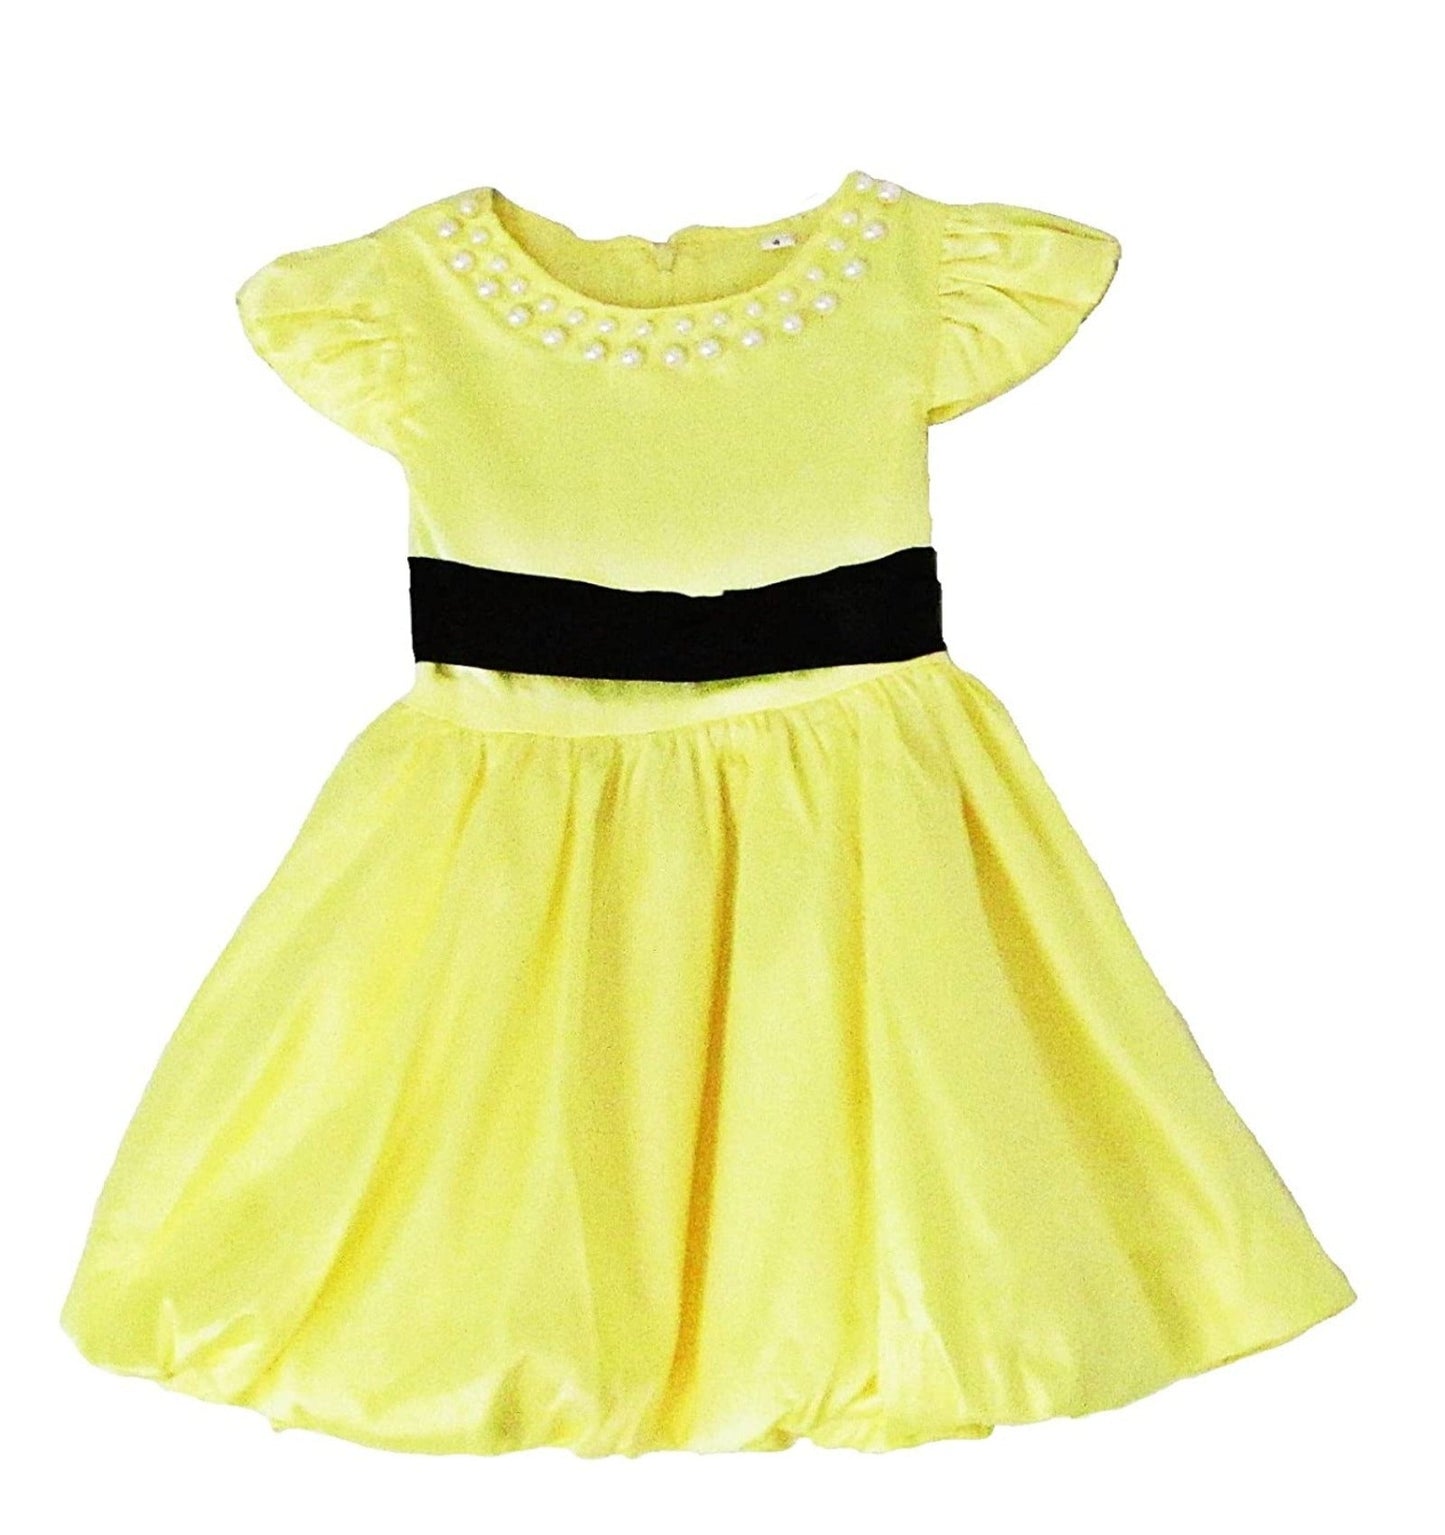 Satin Yellow Dress with Pearls 3-4 Years